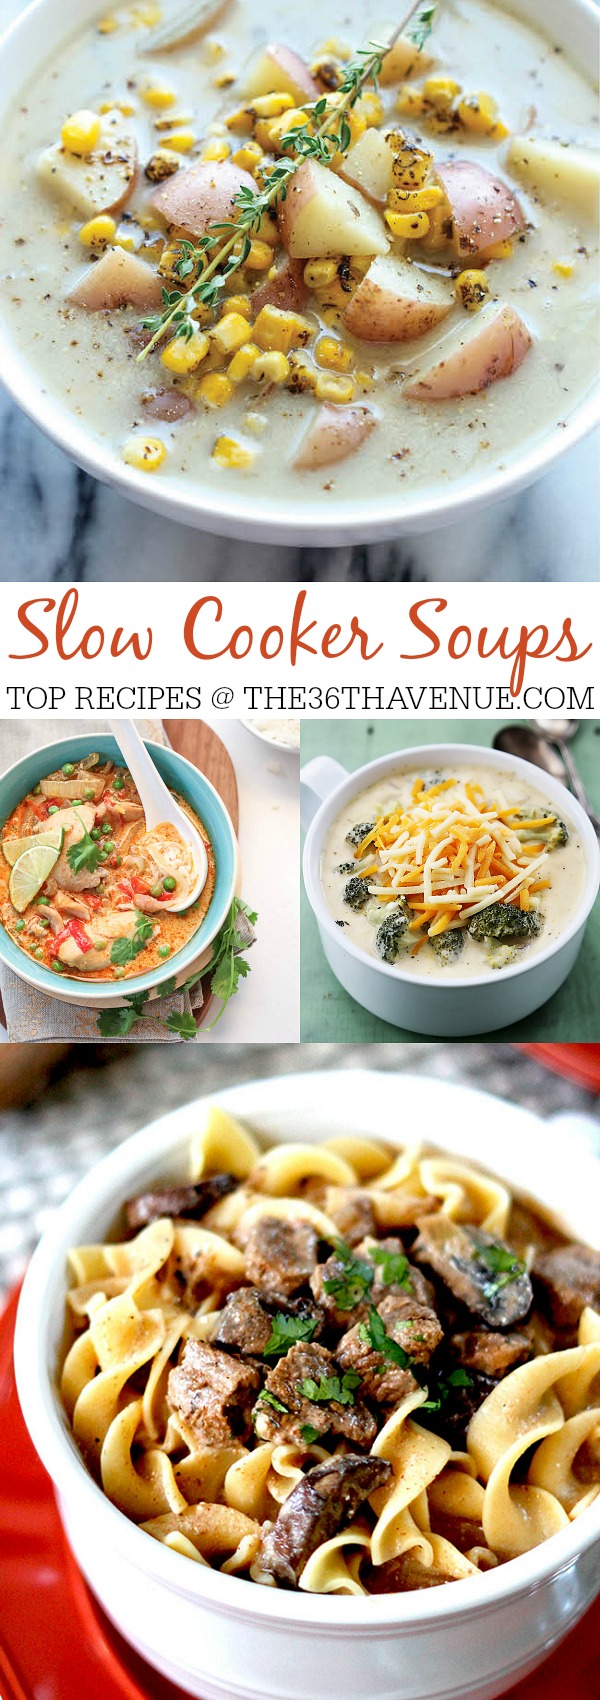 Slow Cooker Soup Recipes - Enjoy these easy and delicious soup recipes at The36thAvenue. Pin it now and make them later. 